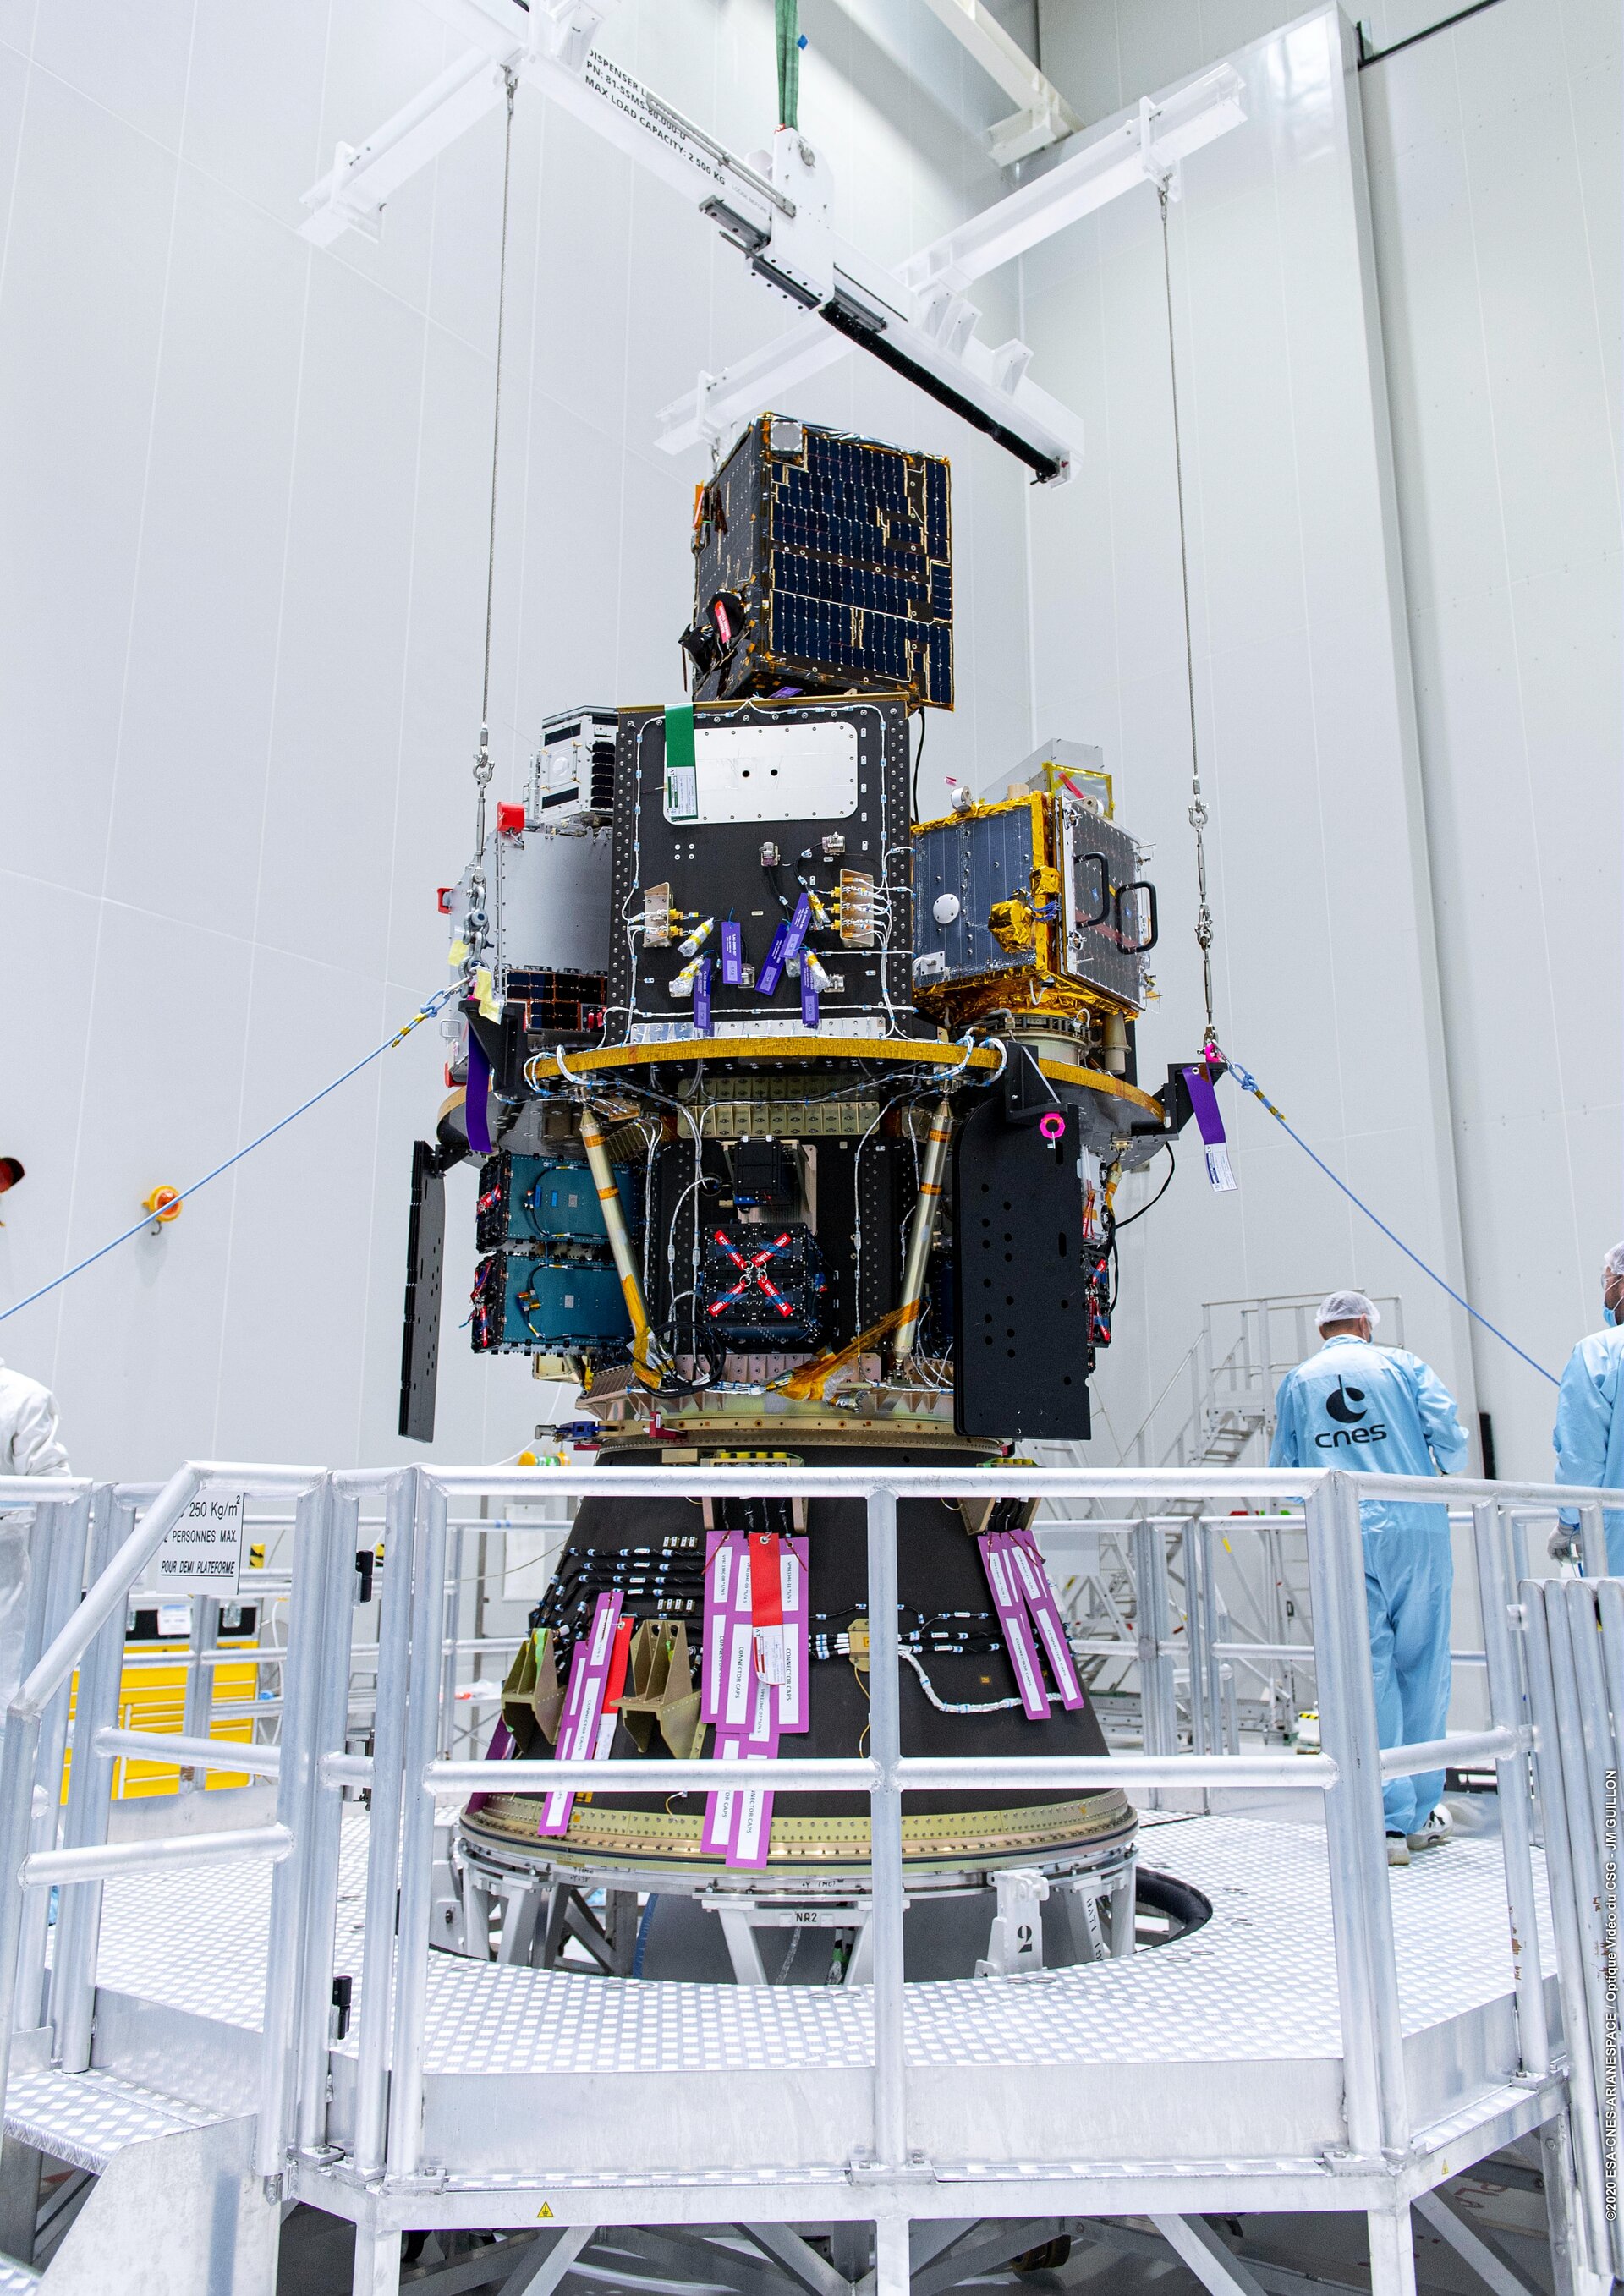 Vega's Small Spacecraft Mission Service (SSMS) dispenser with all satellites is mounted on the rocket's payload adapter at Europe's Spaceport.